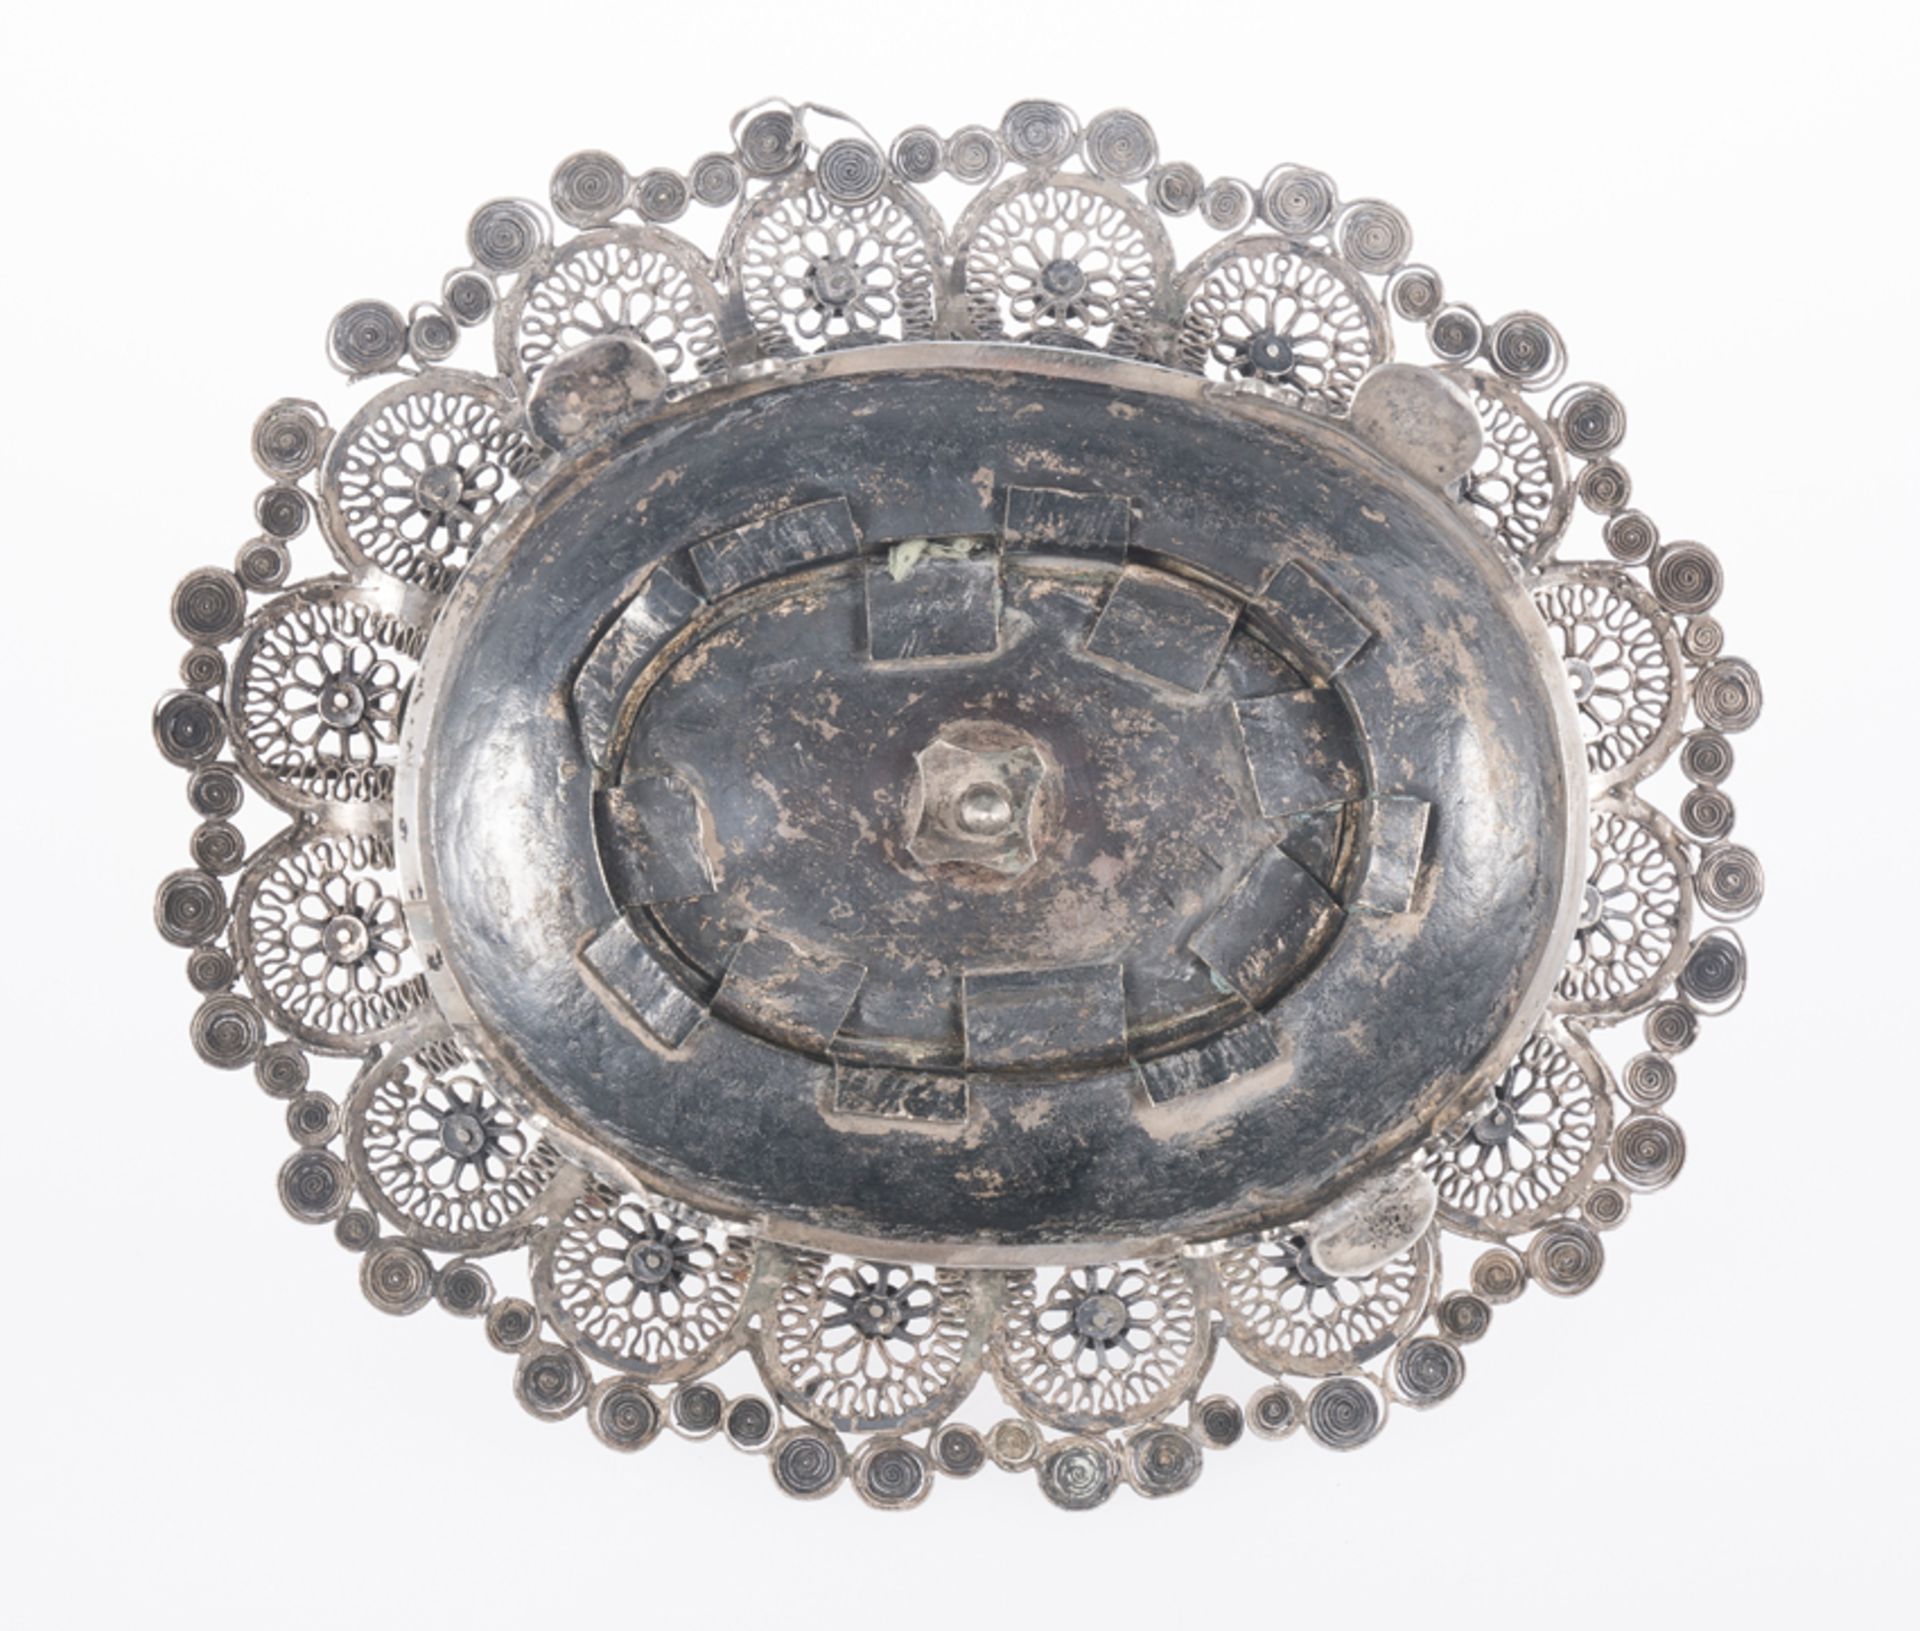 Silver filigree and cast silver centrepiece. Colonial. High Peru 19th century. - Image 5 of 5